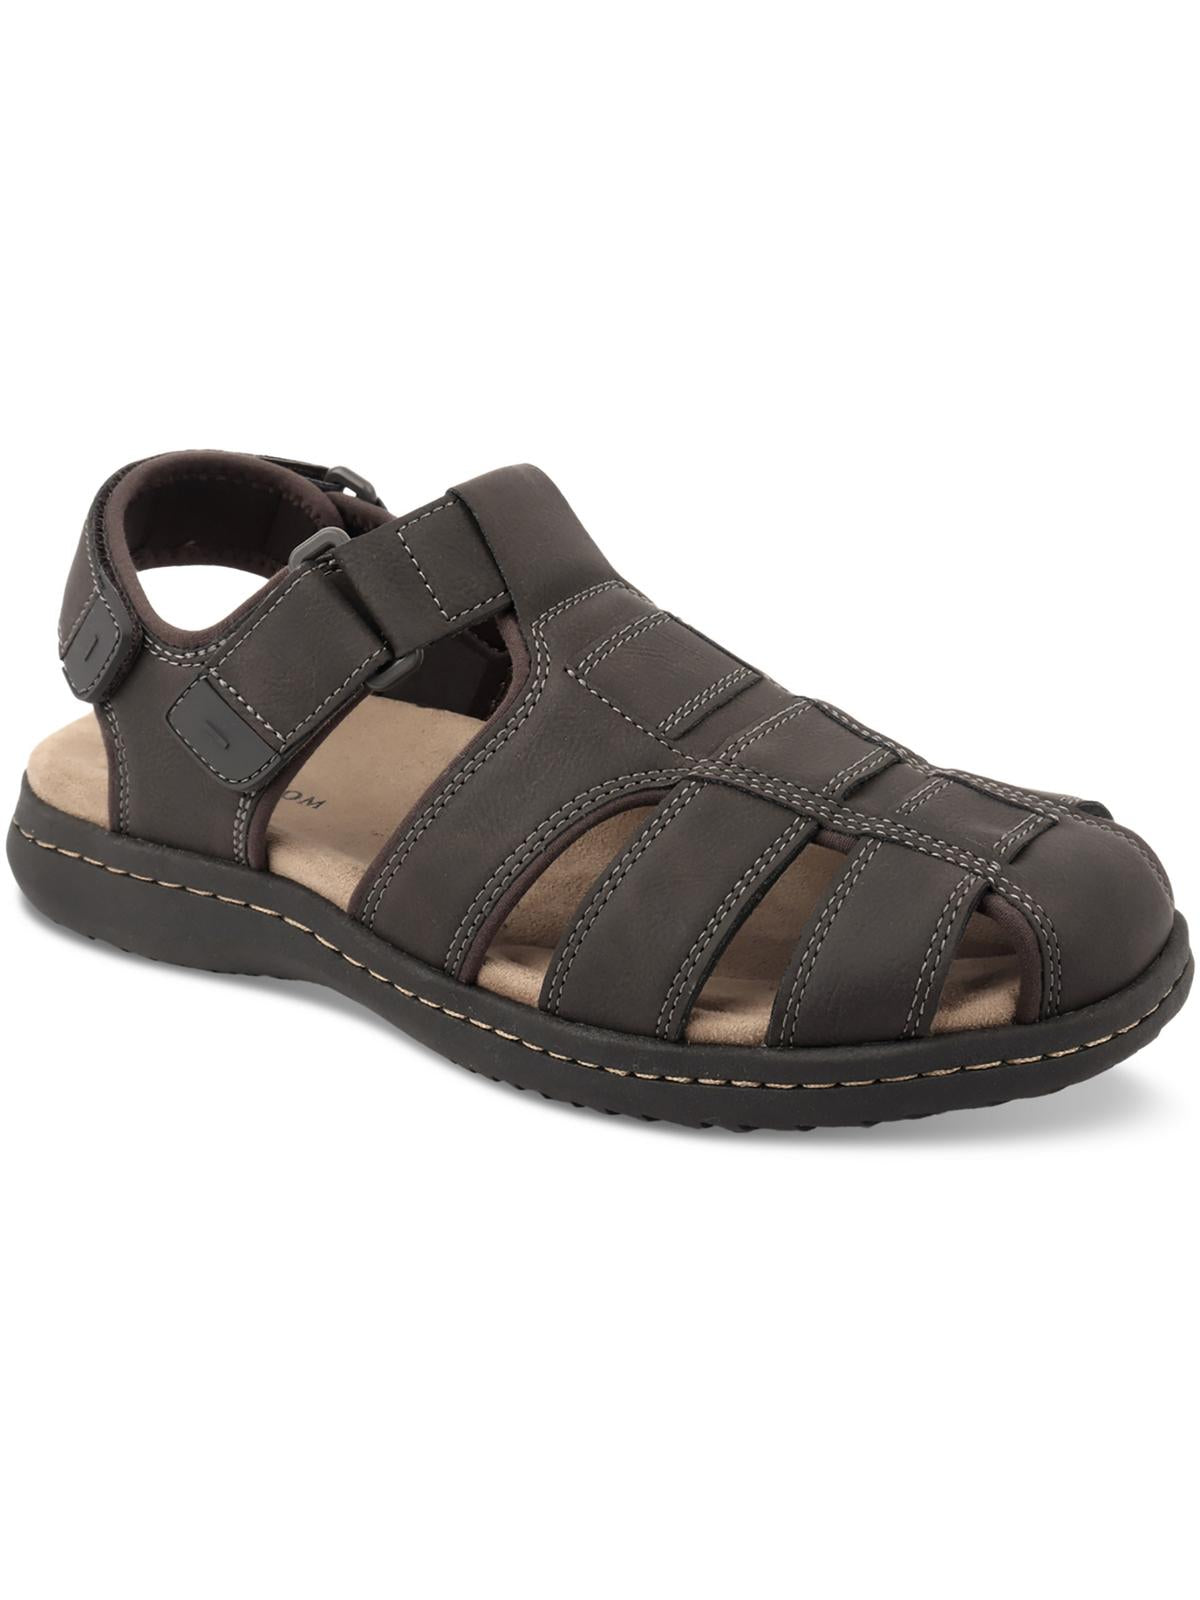 Club Room Justin Mens Faux Leather Adjustable Fisherman Sandals In Grey